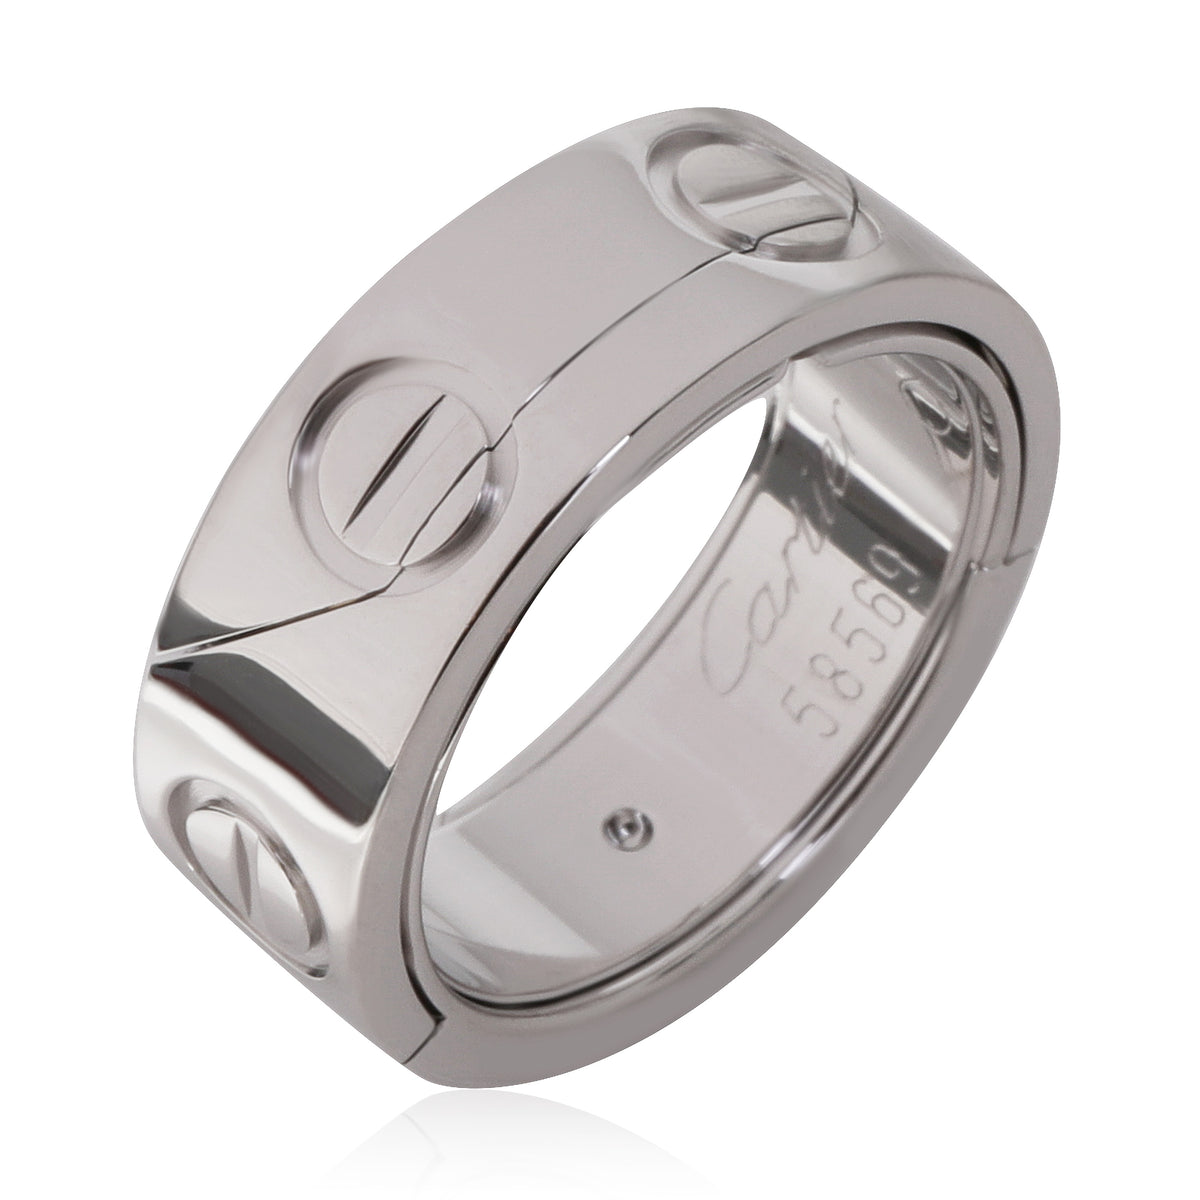 Cartier Astro Vintage  Love Ring in 18K White Gold